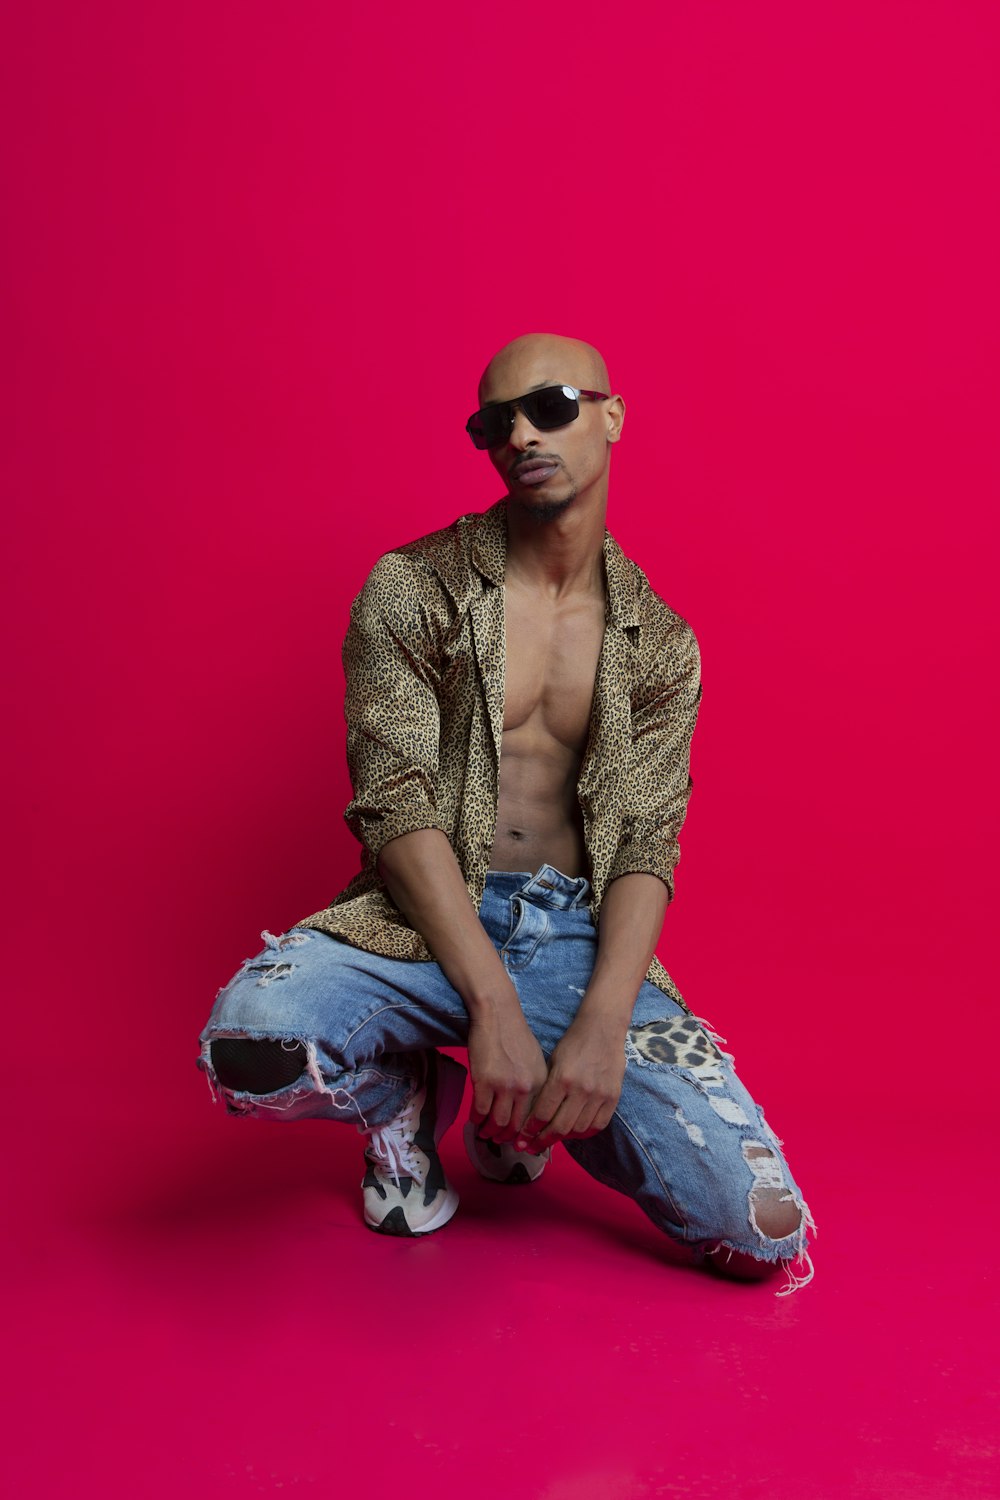 a man with no shirt sitting on a pink background